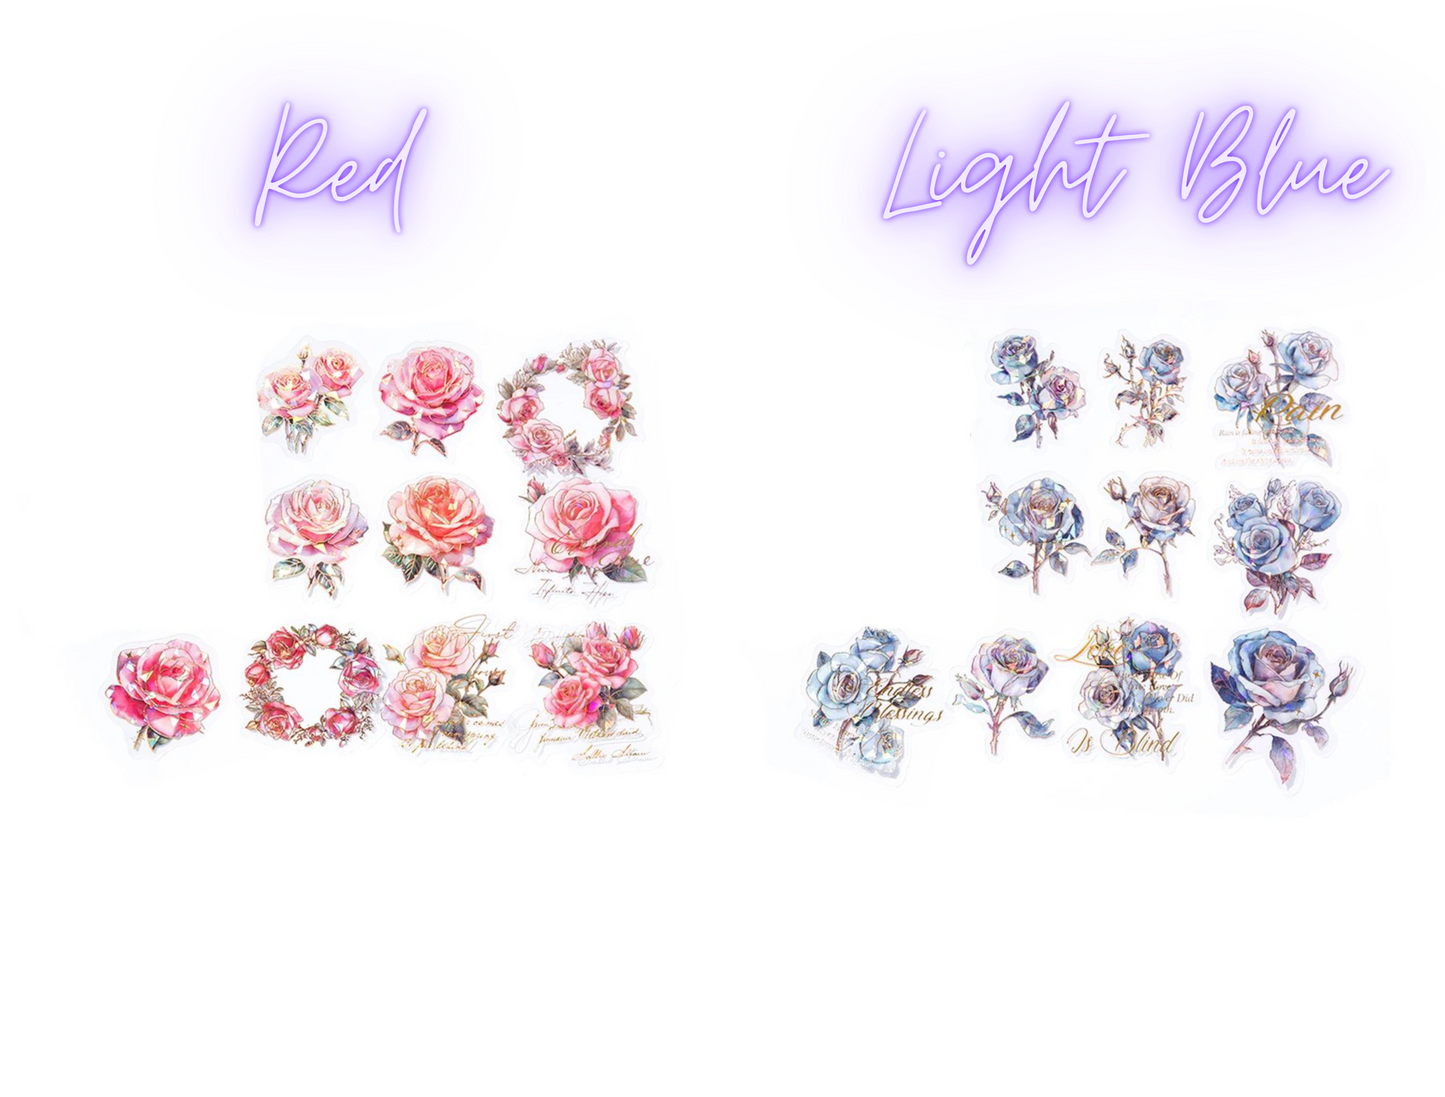 20 Holographic Rose Stickers, Gold Foil Rose Stickers, Large Rose Stickers, Vintage Stickers